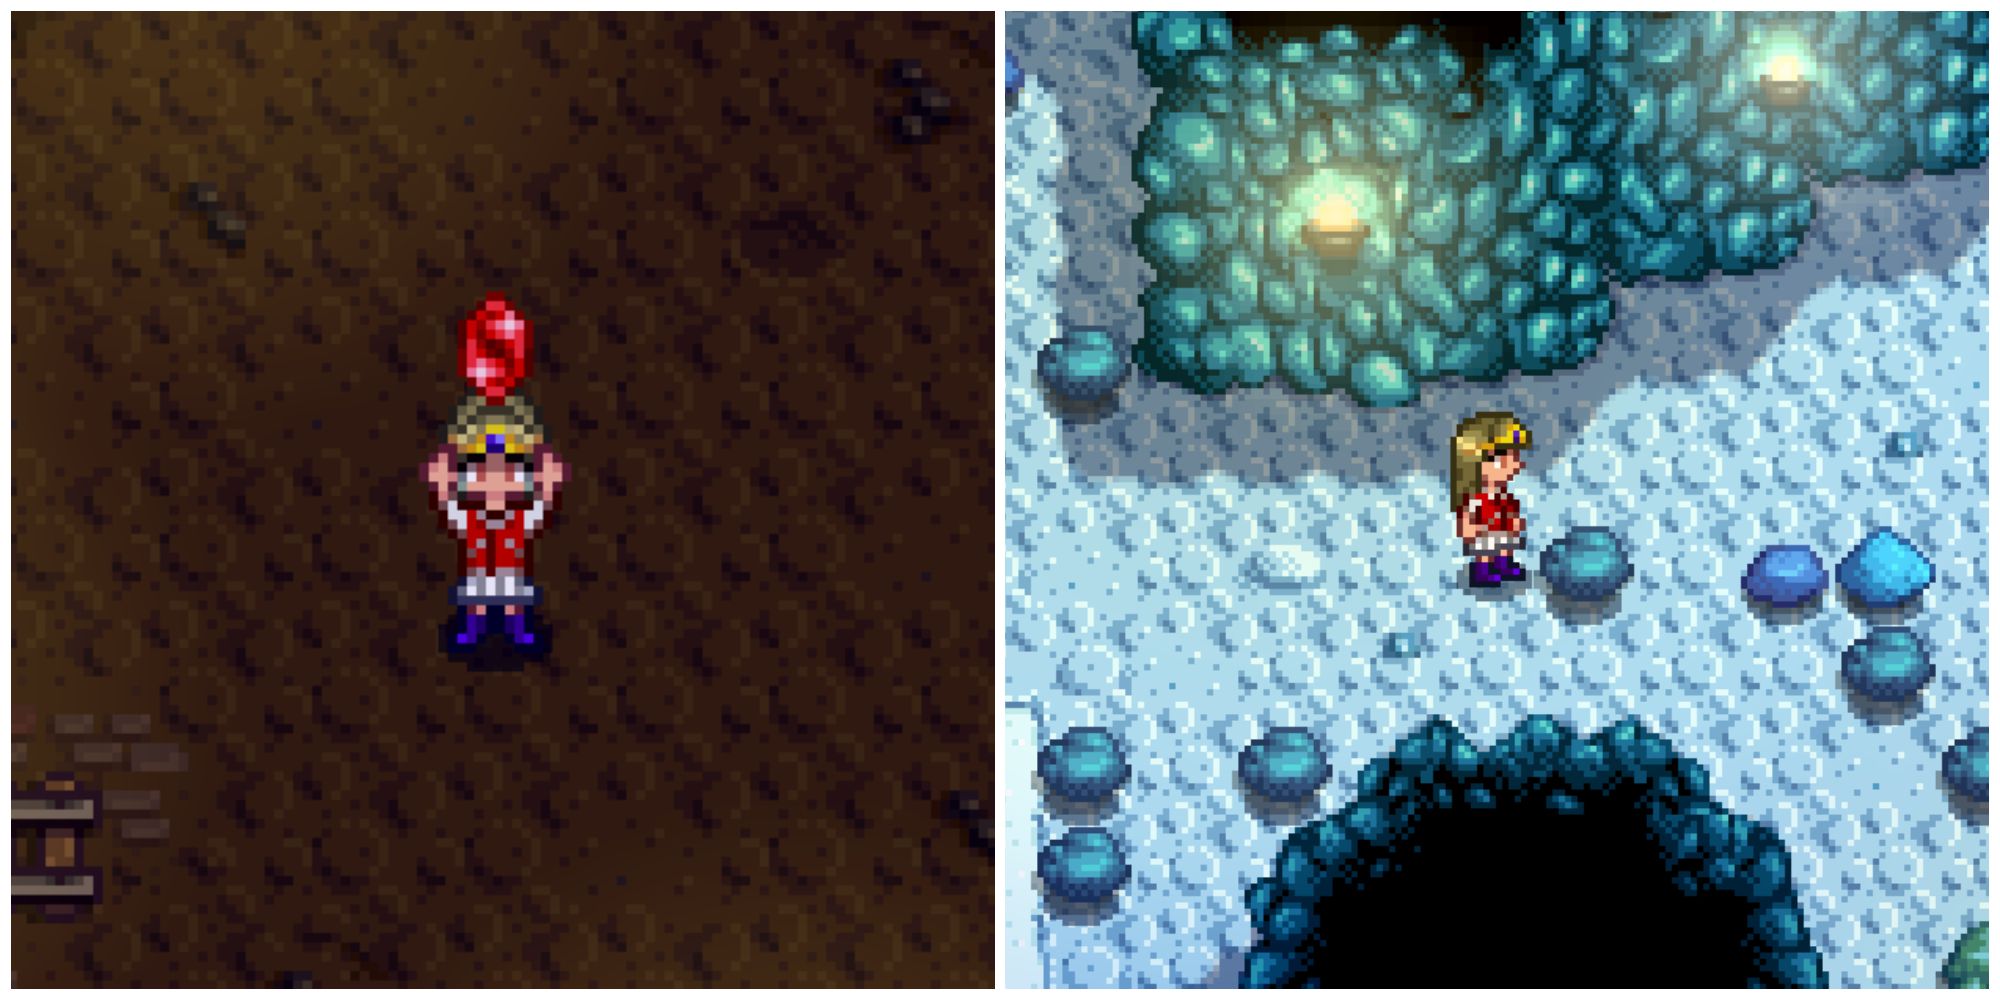 Split image of a character holding a Ruby and a character mining in the Mines in Stardew Valley